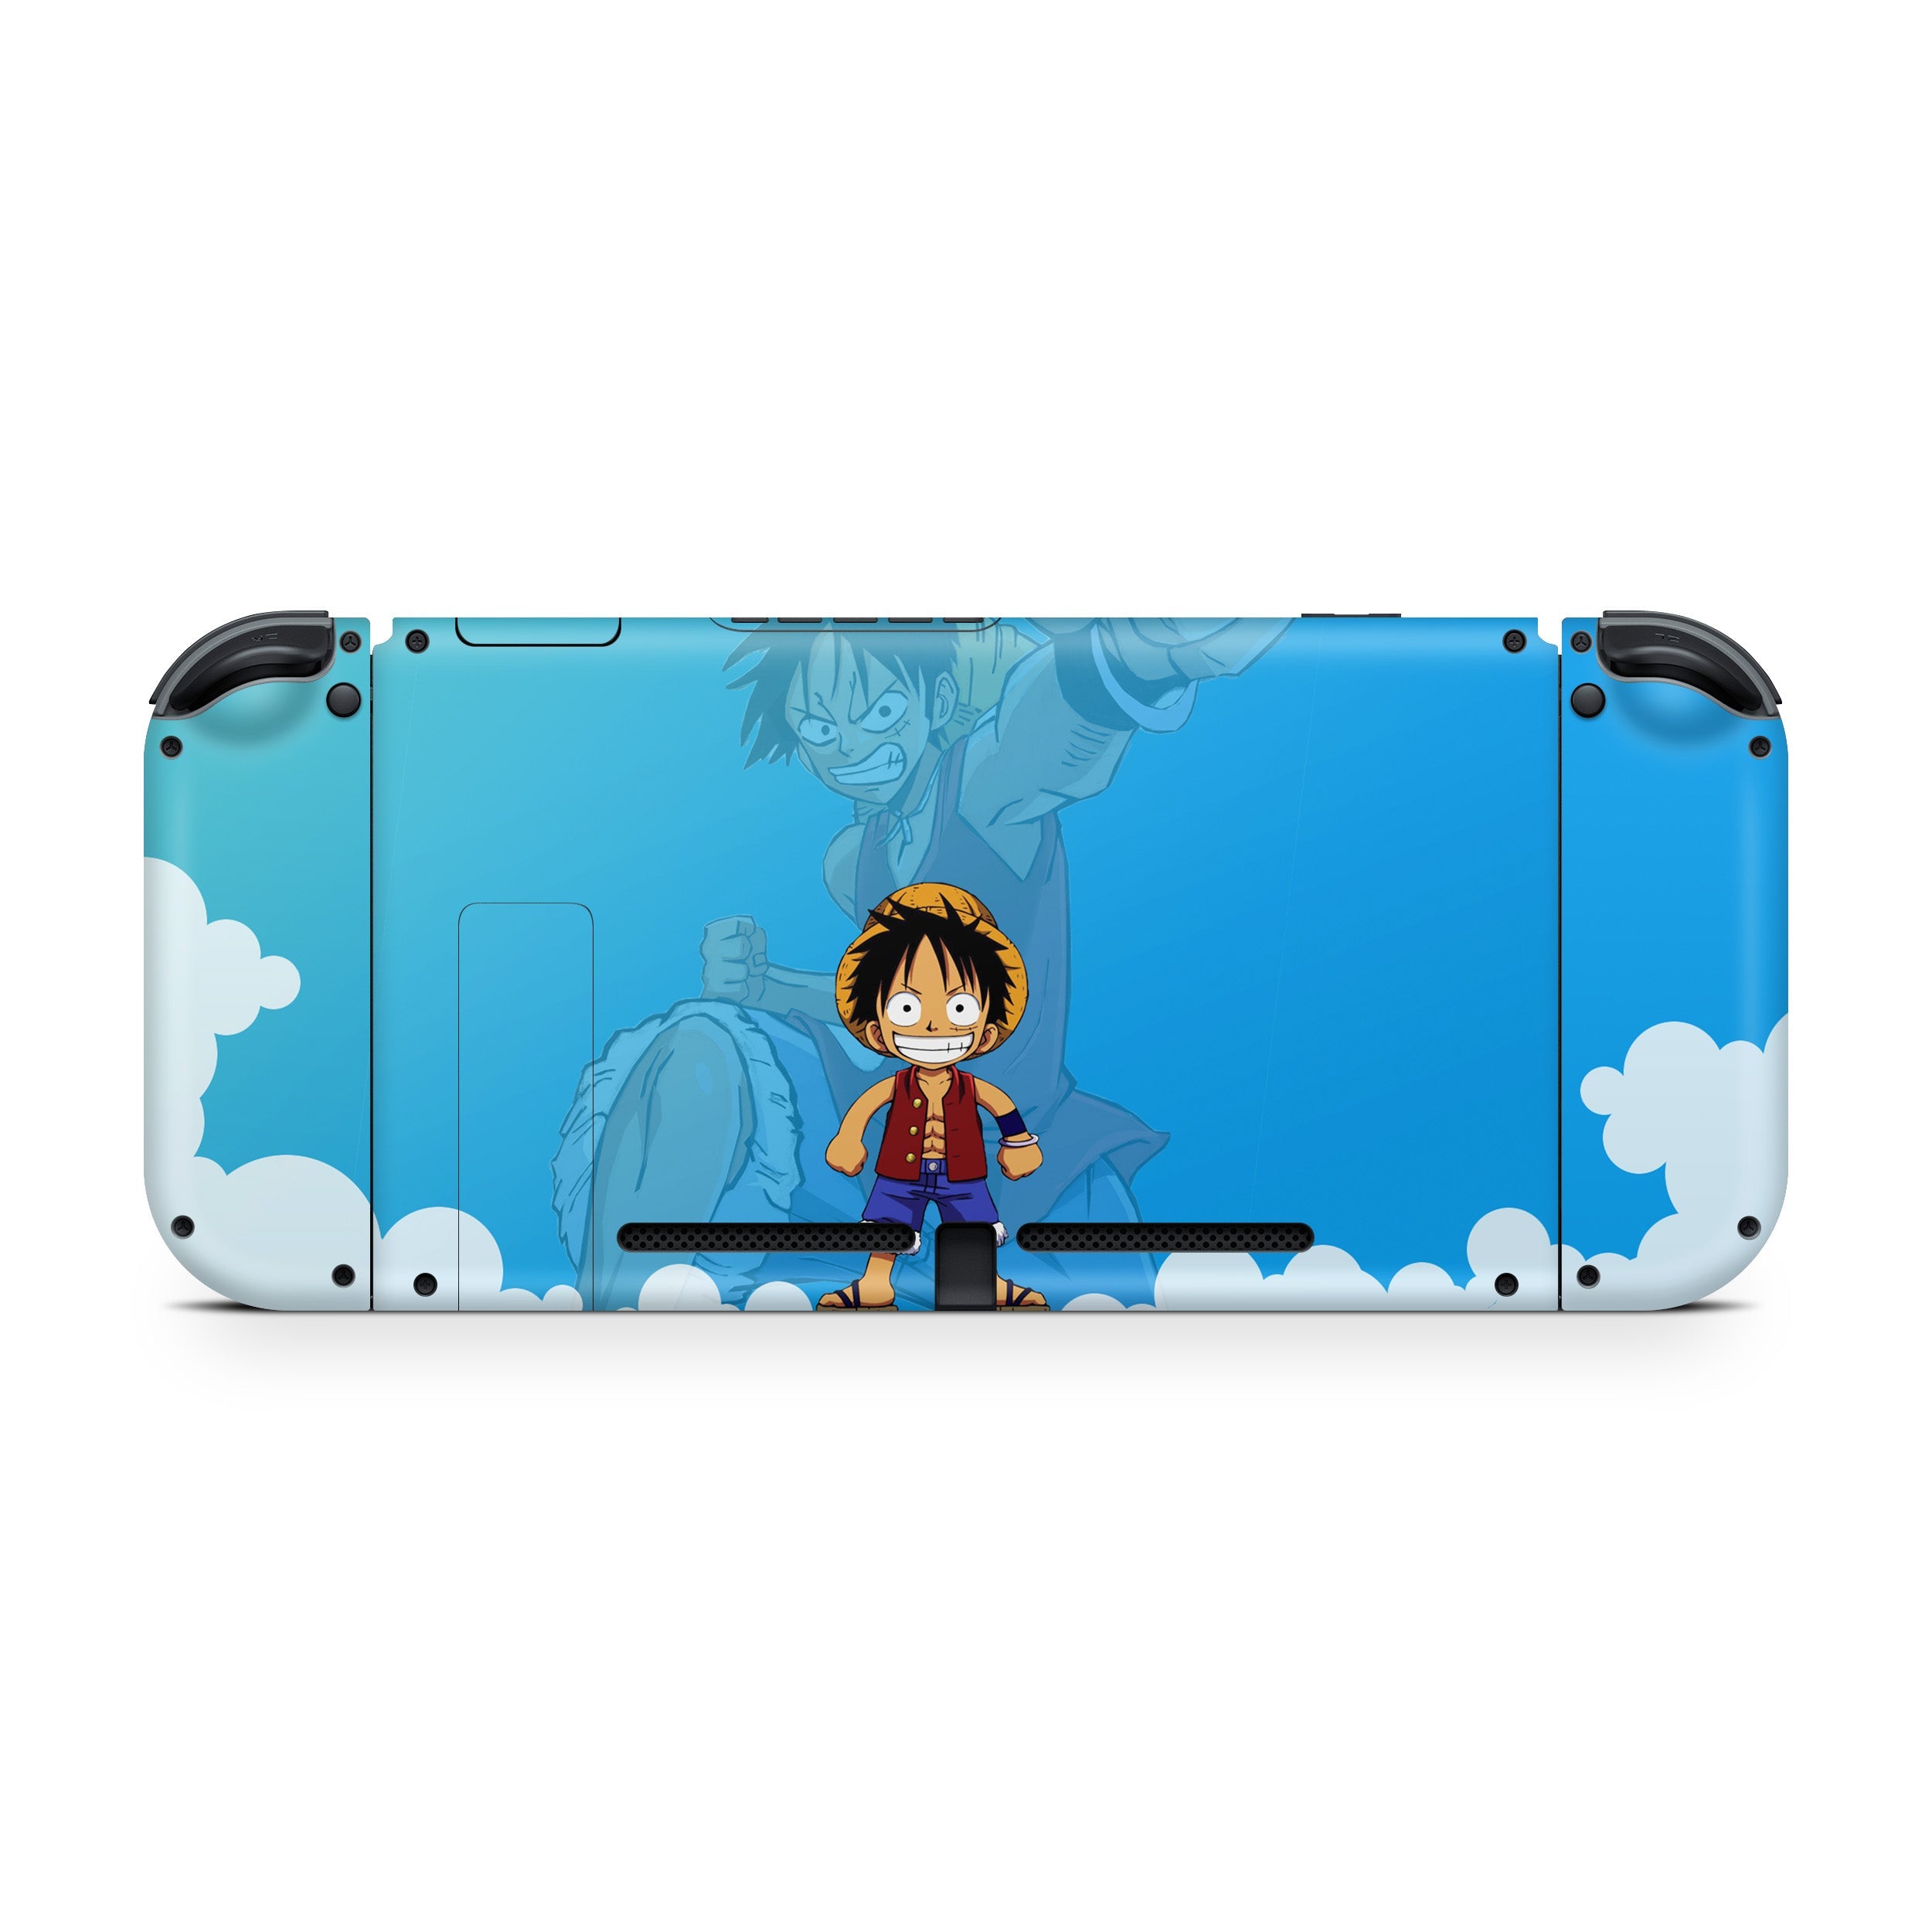 A video game skin featuring a One Piece Monkey D Luffy design for the Nintendo Switch.